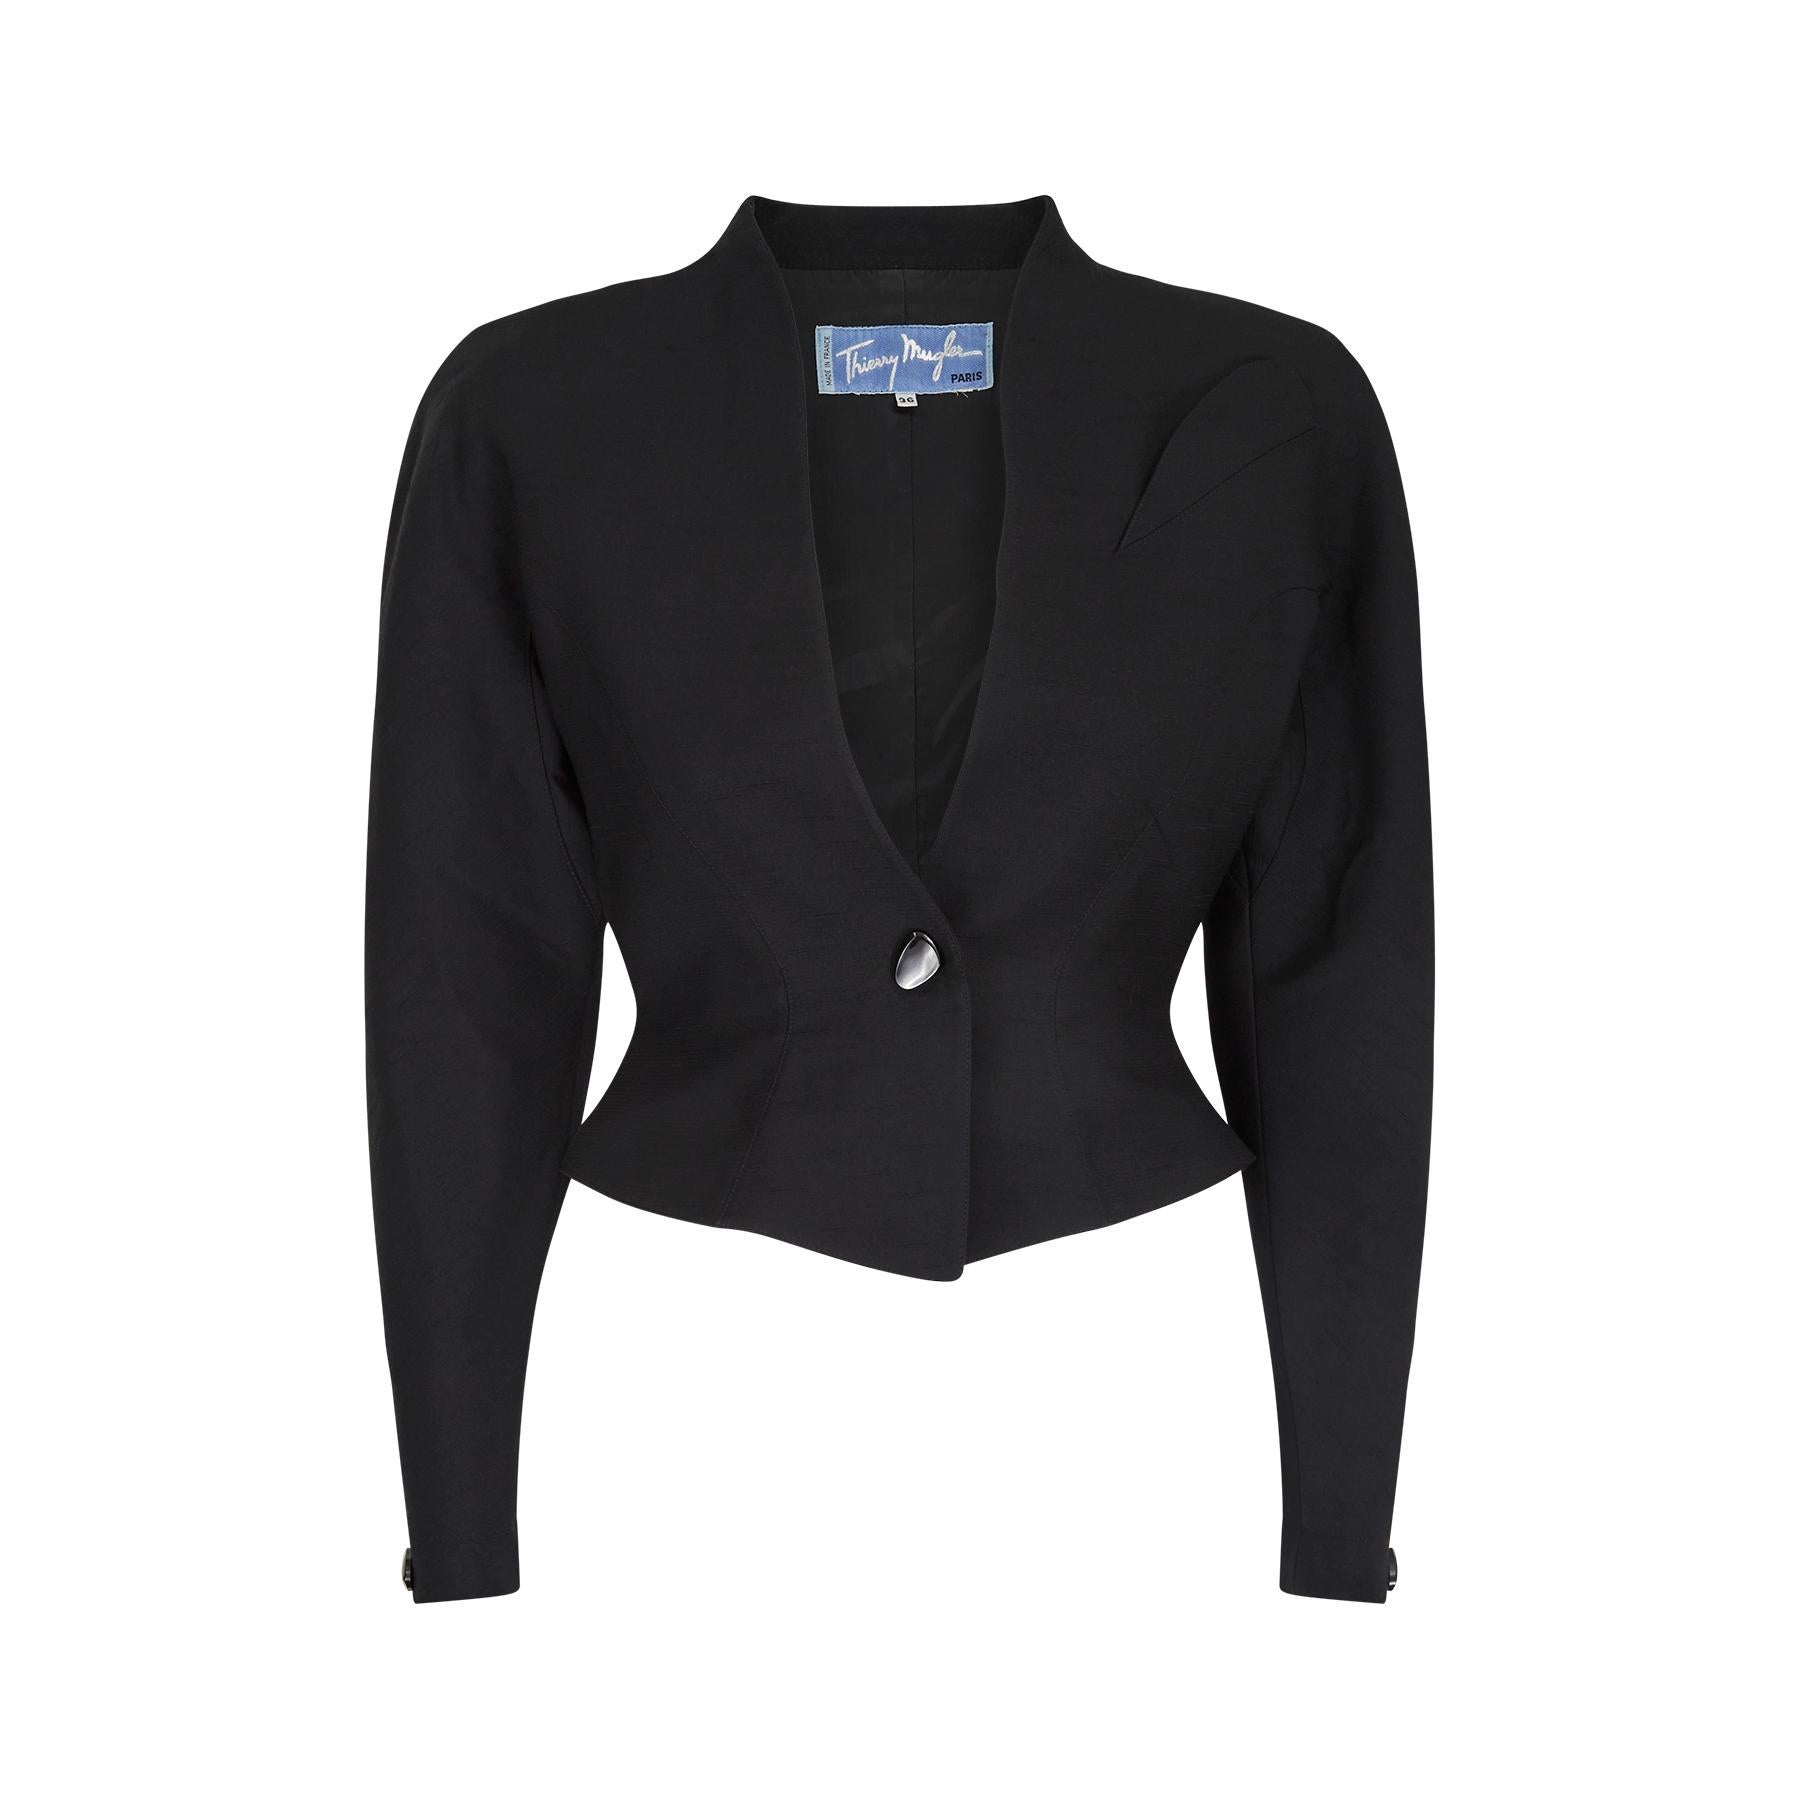 There's Thierry Mugler jackets and then there's this Thierry Mugler jacket! This is as good as it gets and it dates from around the time period in the mid 1990s when Thierry Mugler was the most celebrated designer on the catwalk at Paris Fashion